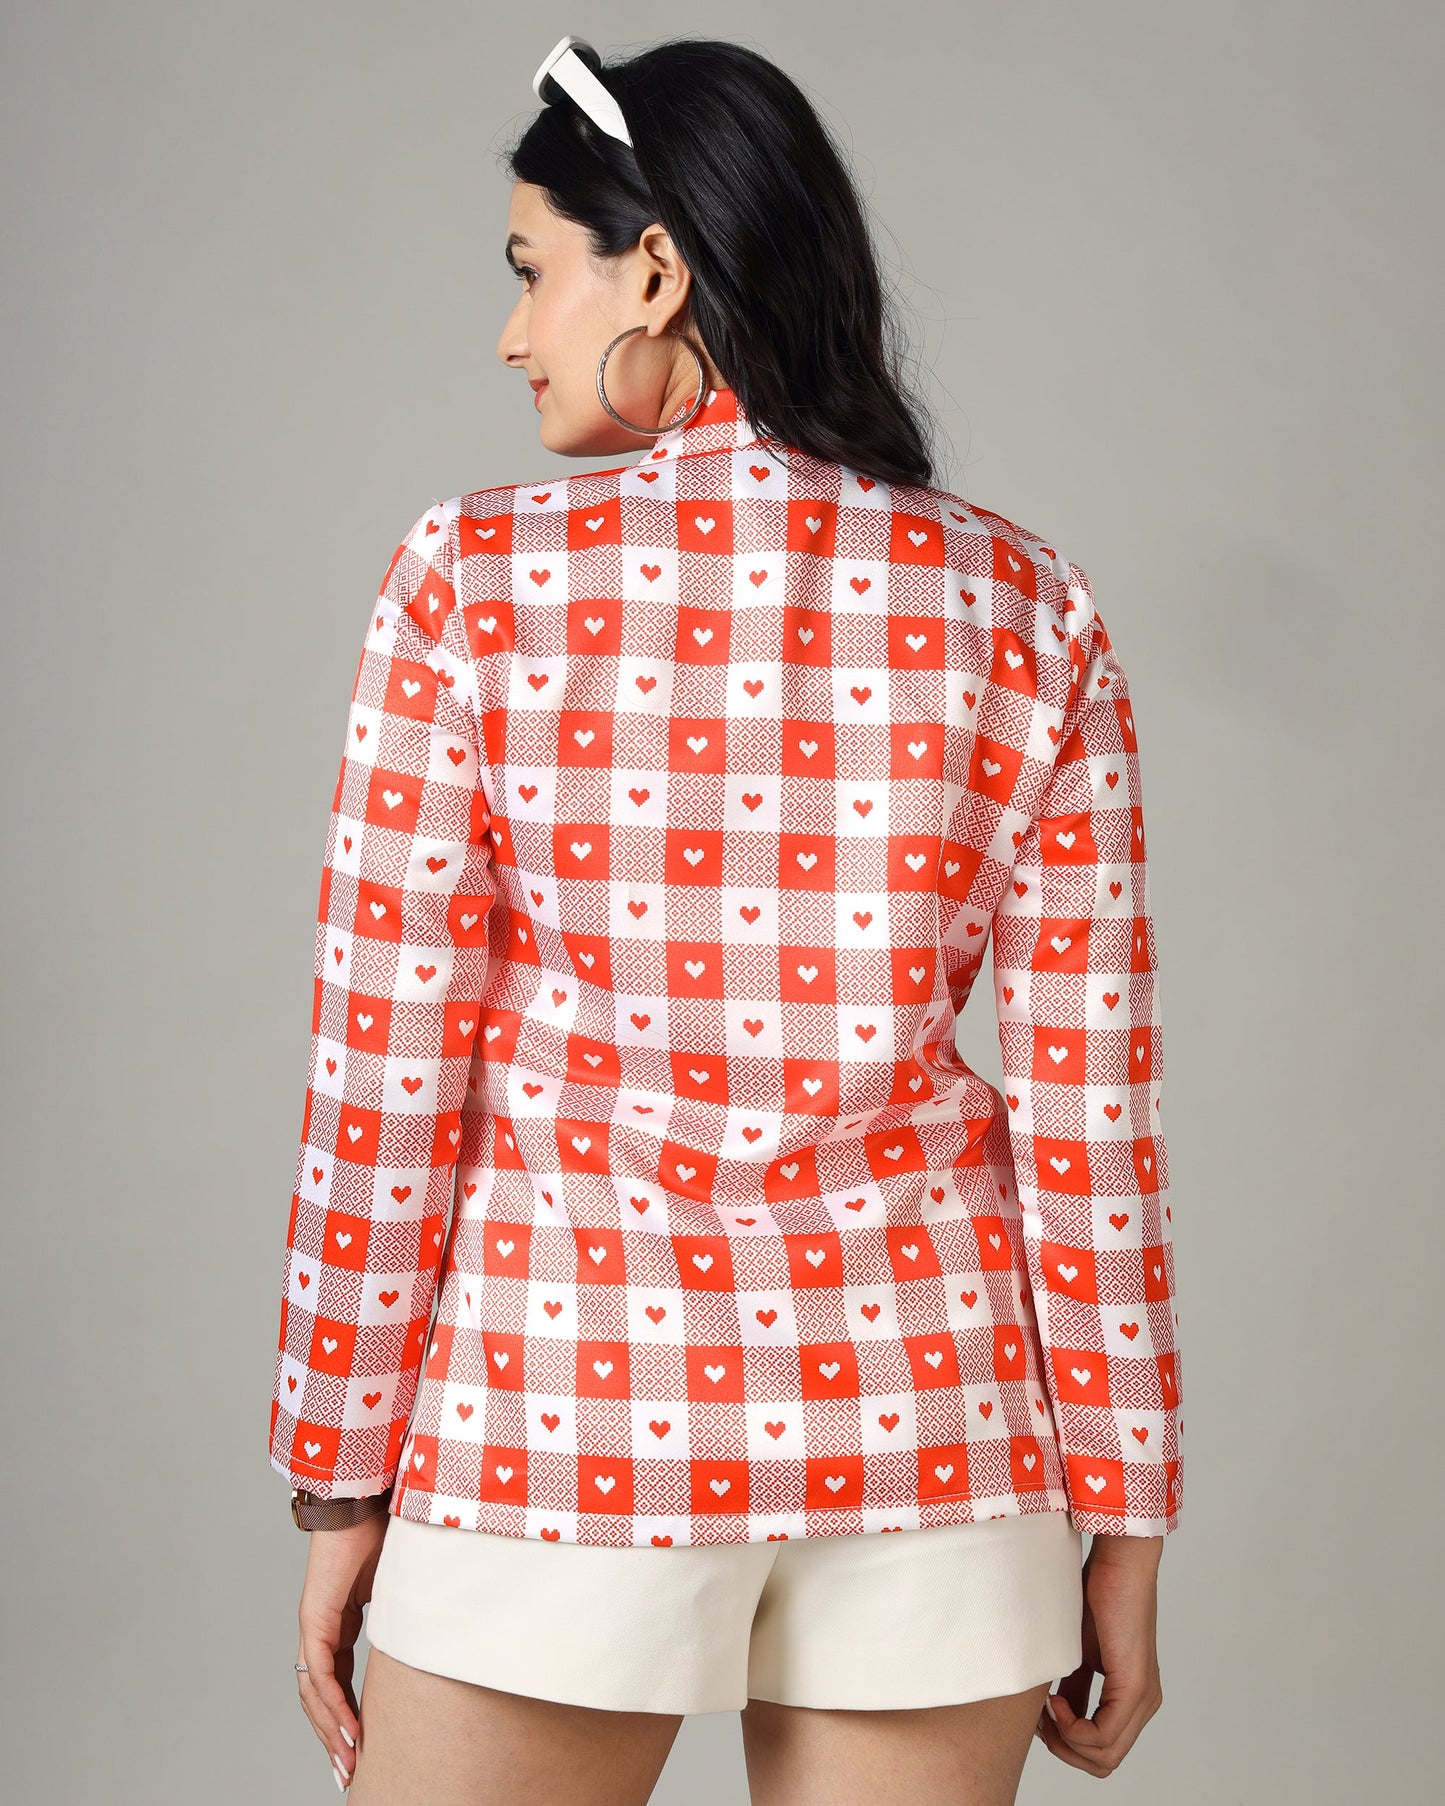 Women's Jacket with a Heart-Fueled Twist